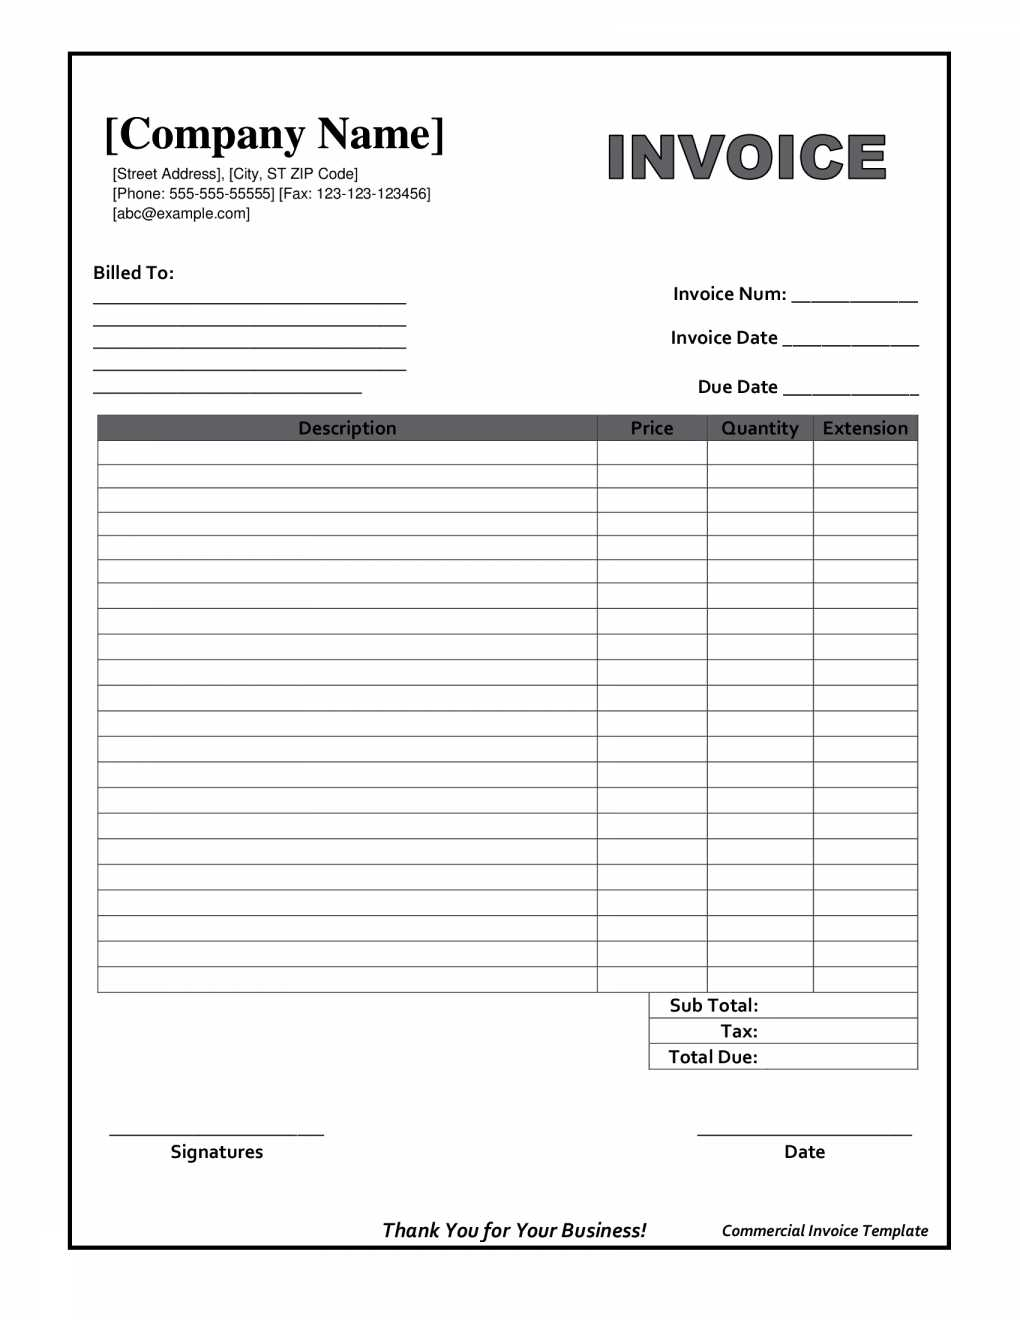 free download of blank vintage invoice template